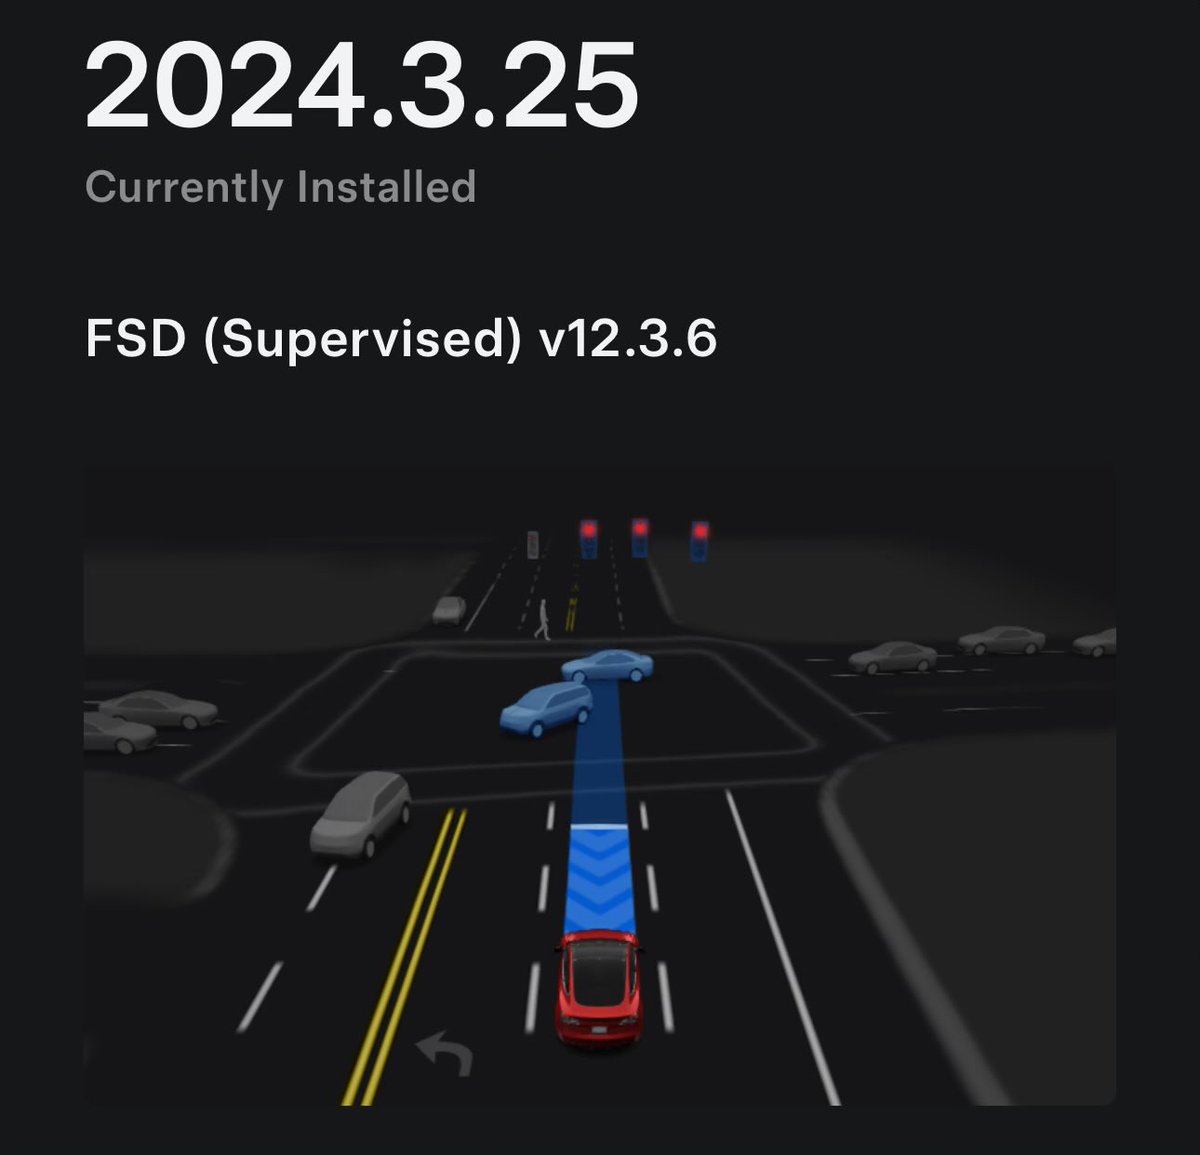 Woohoo - just got FSD (Supervised) 12.3.6 on my 2022 Model X with USS & now it has Tesla Vision Park Assist & the new Autopark! This sure wasn’t just a standard point release. Amazing updates from the @tesla @tesla_ai teams! Thanks @aelluswamy!